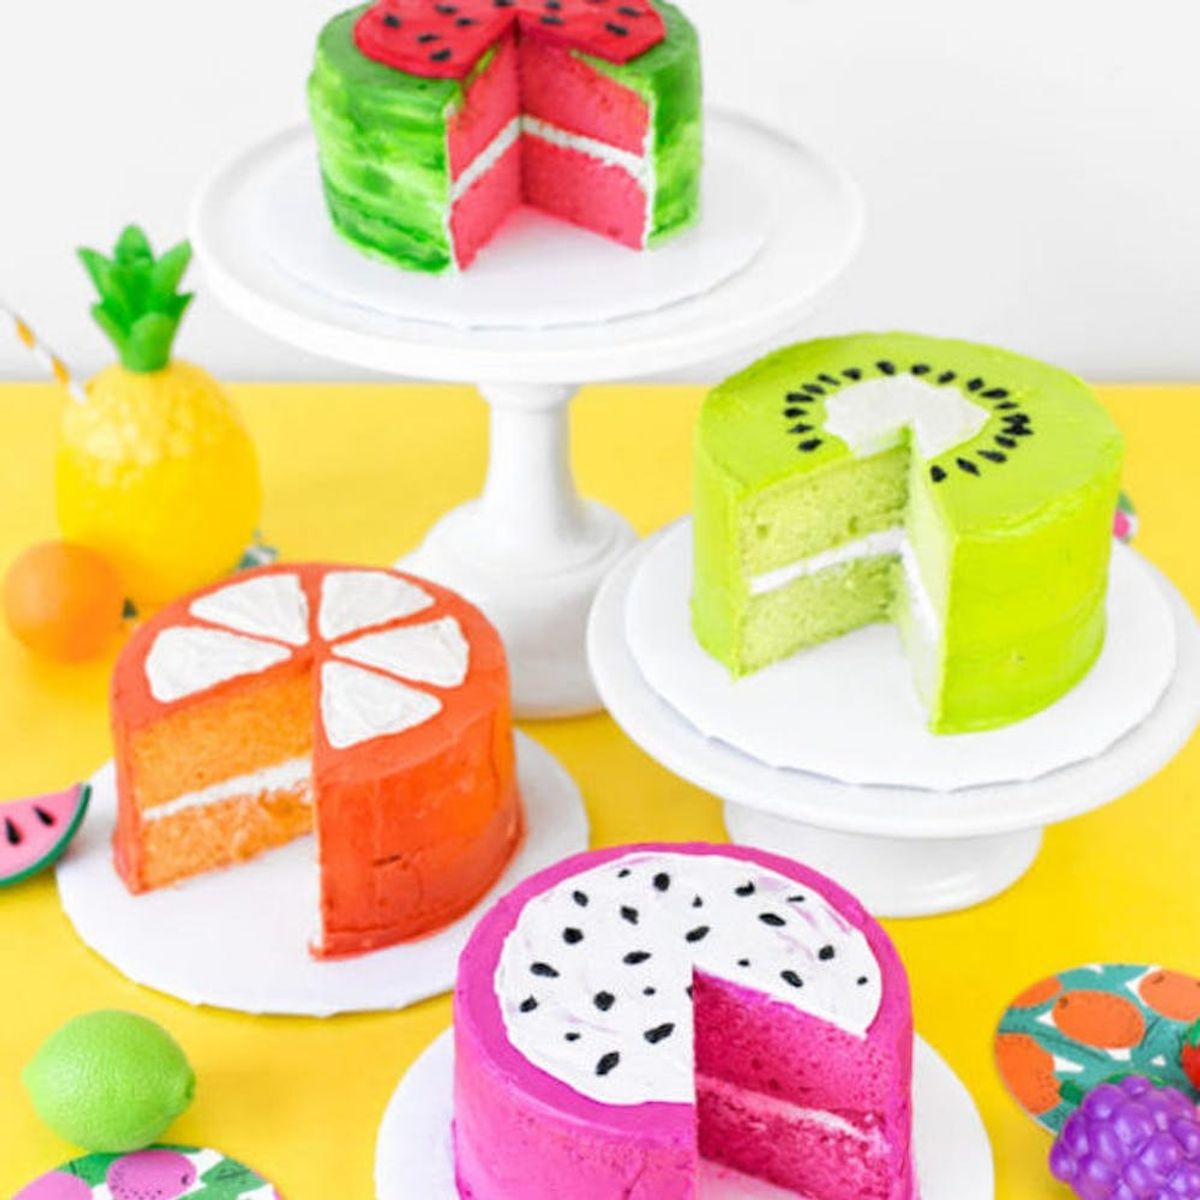 What to Make This Weekend: Flamingo Marquee Light, Tropical Fruit Cakes + More